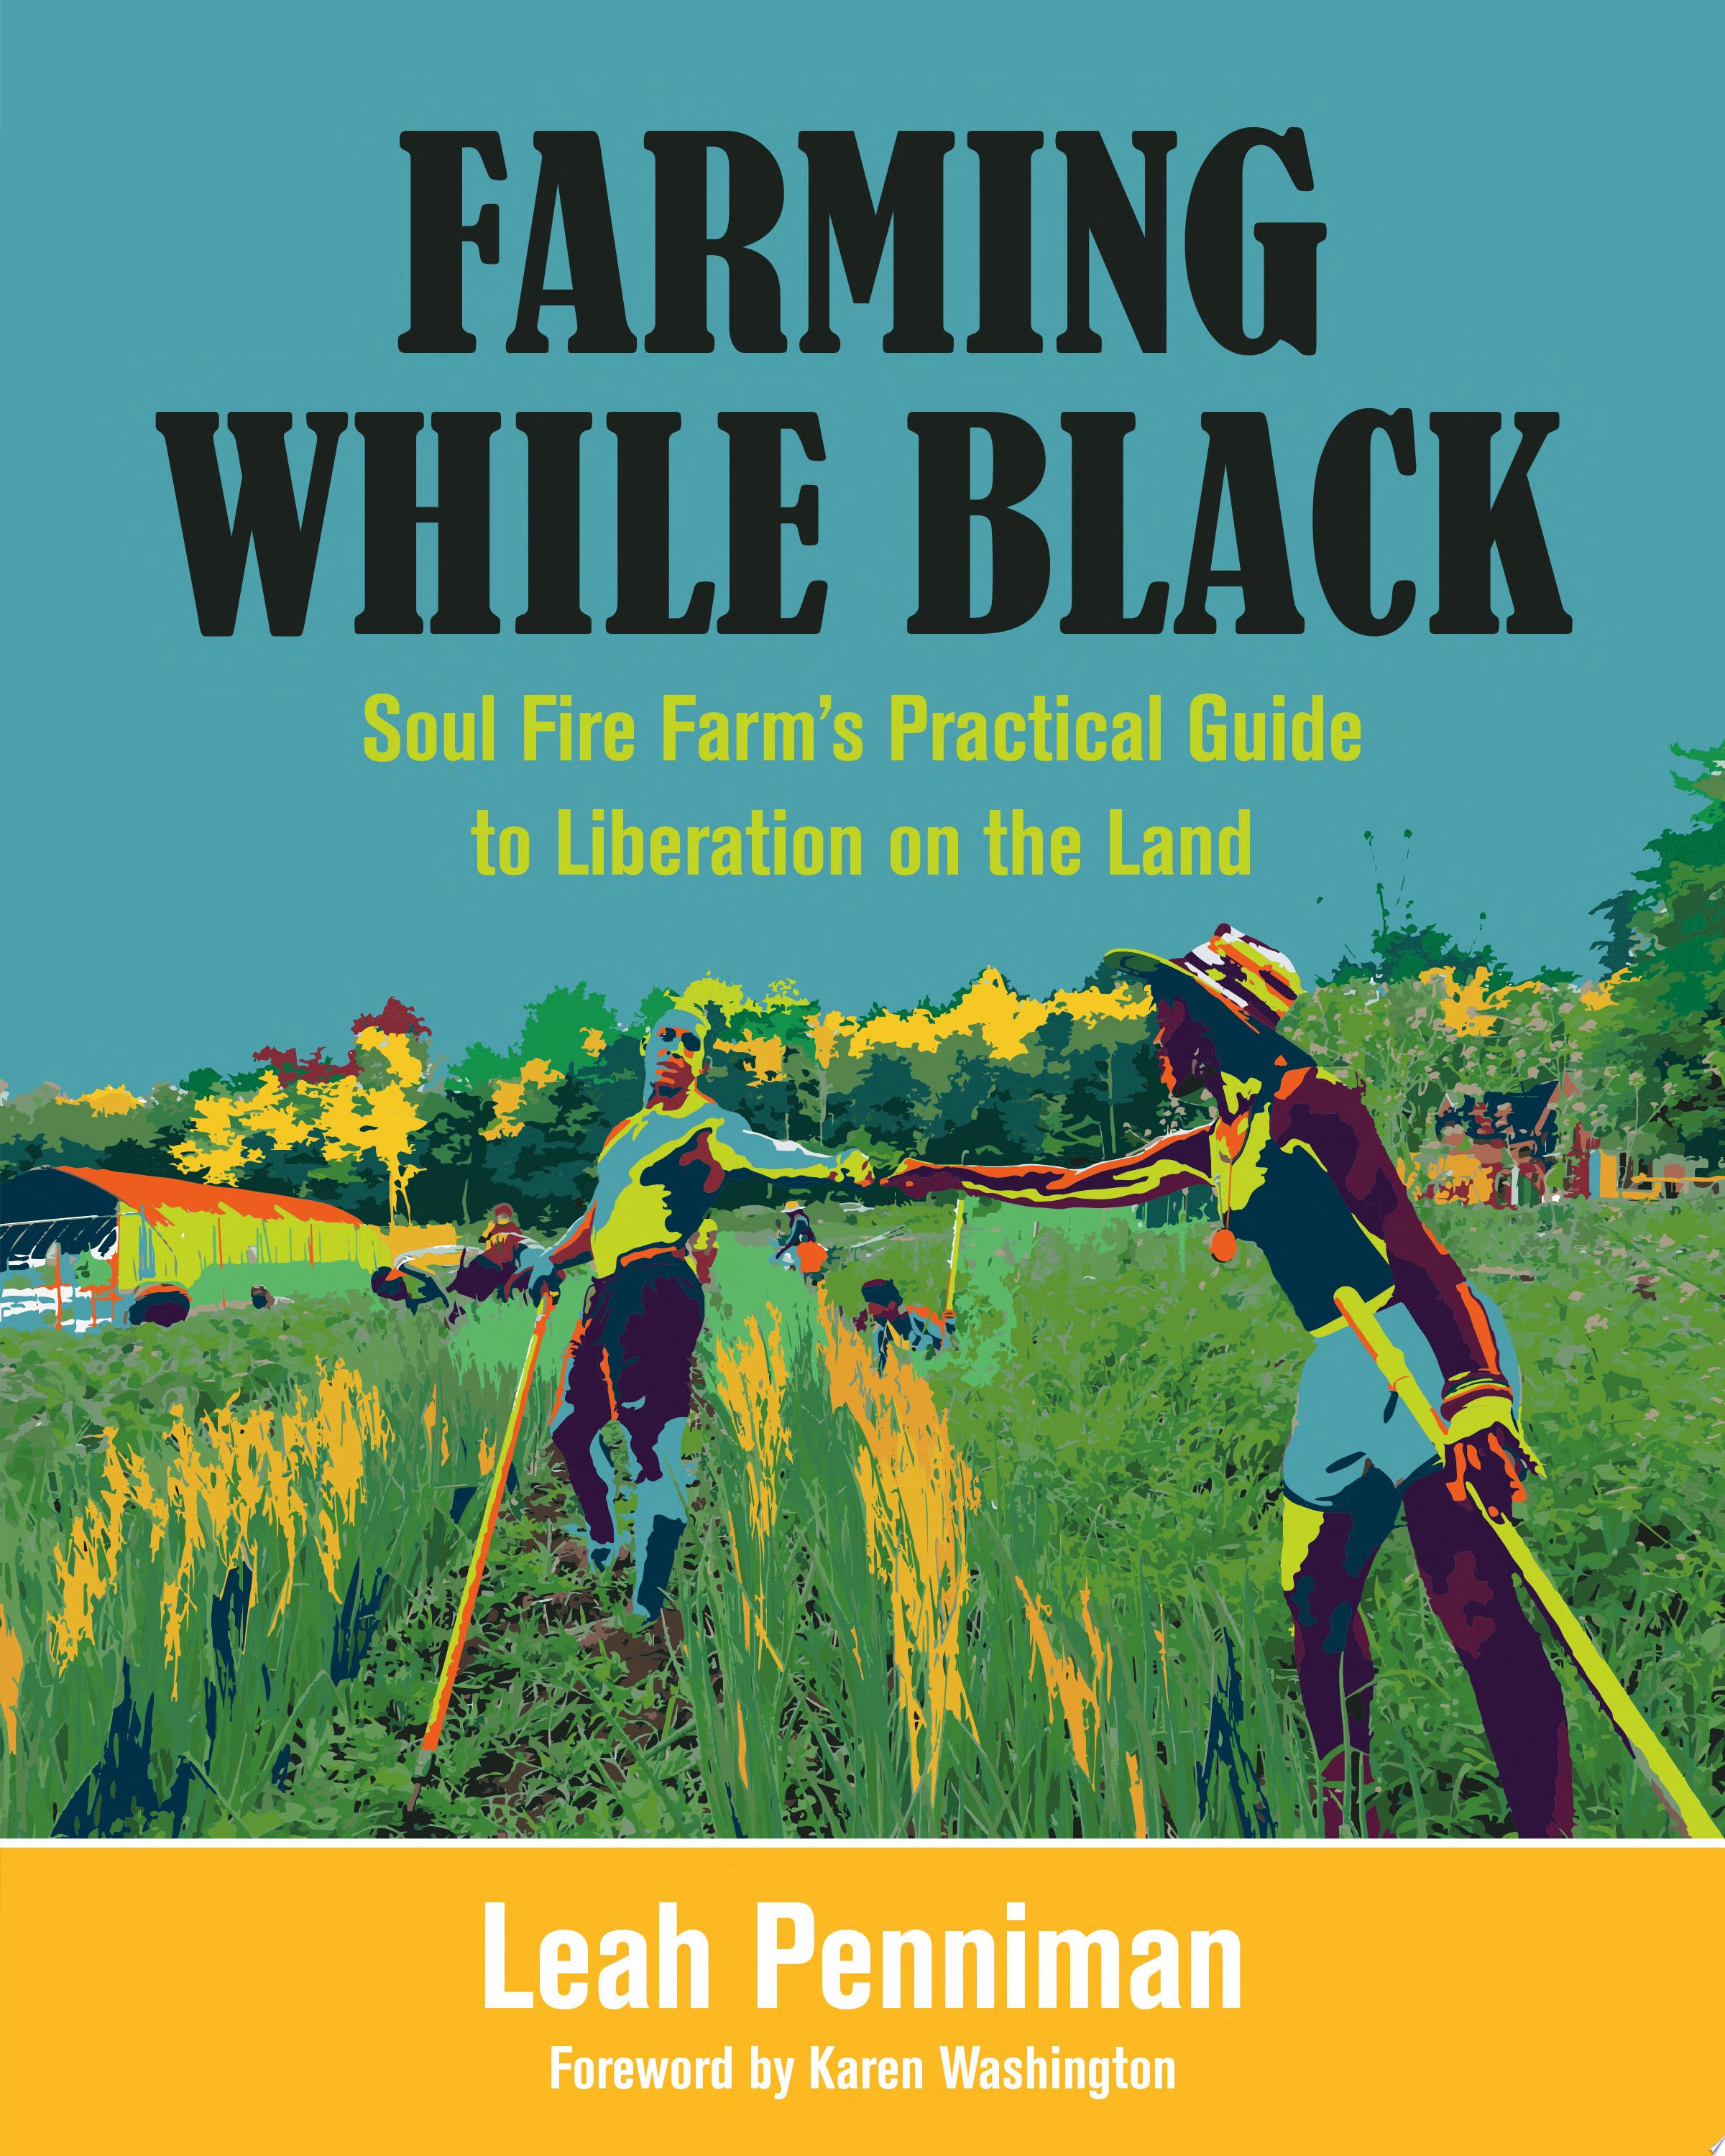 Image for "Farming While Black"